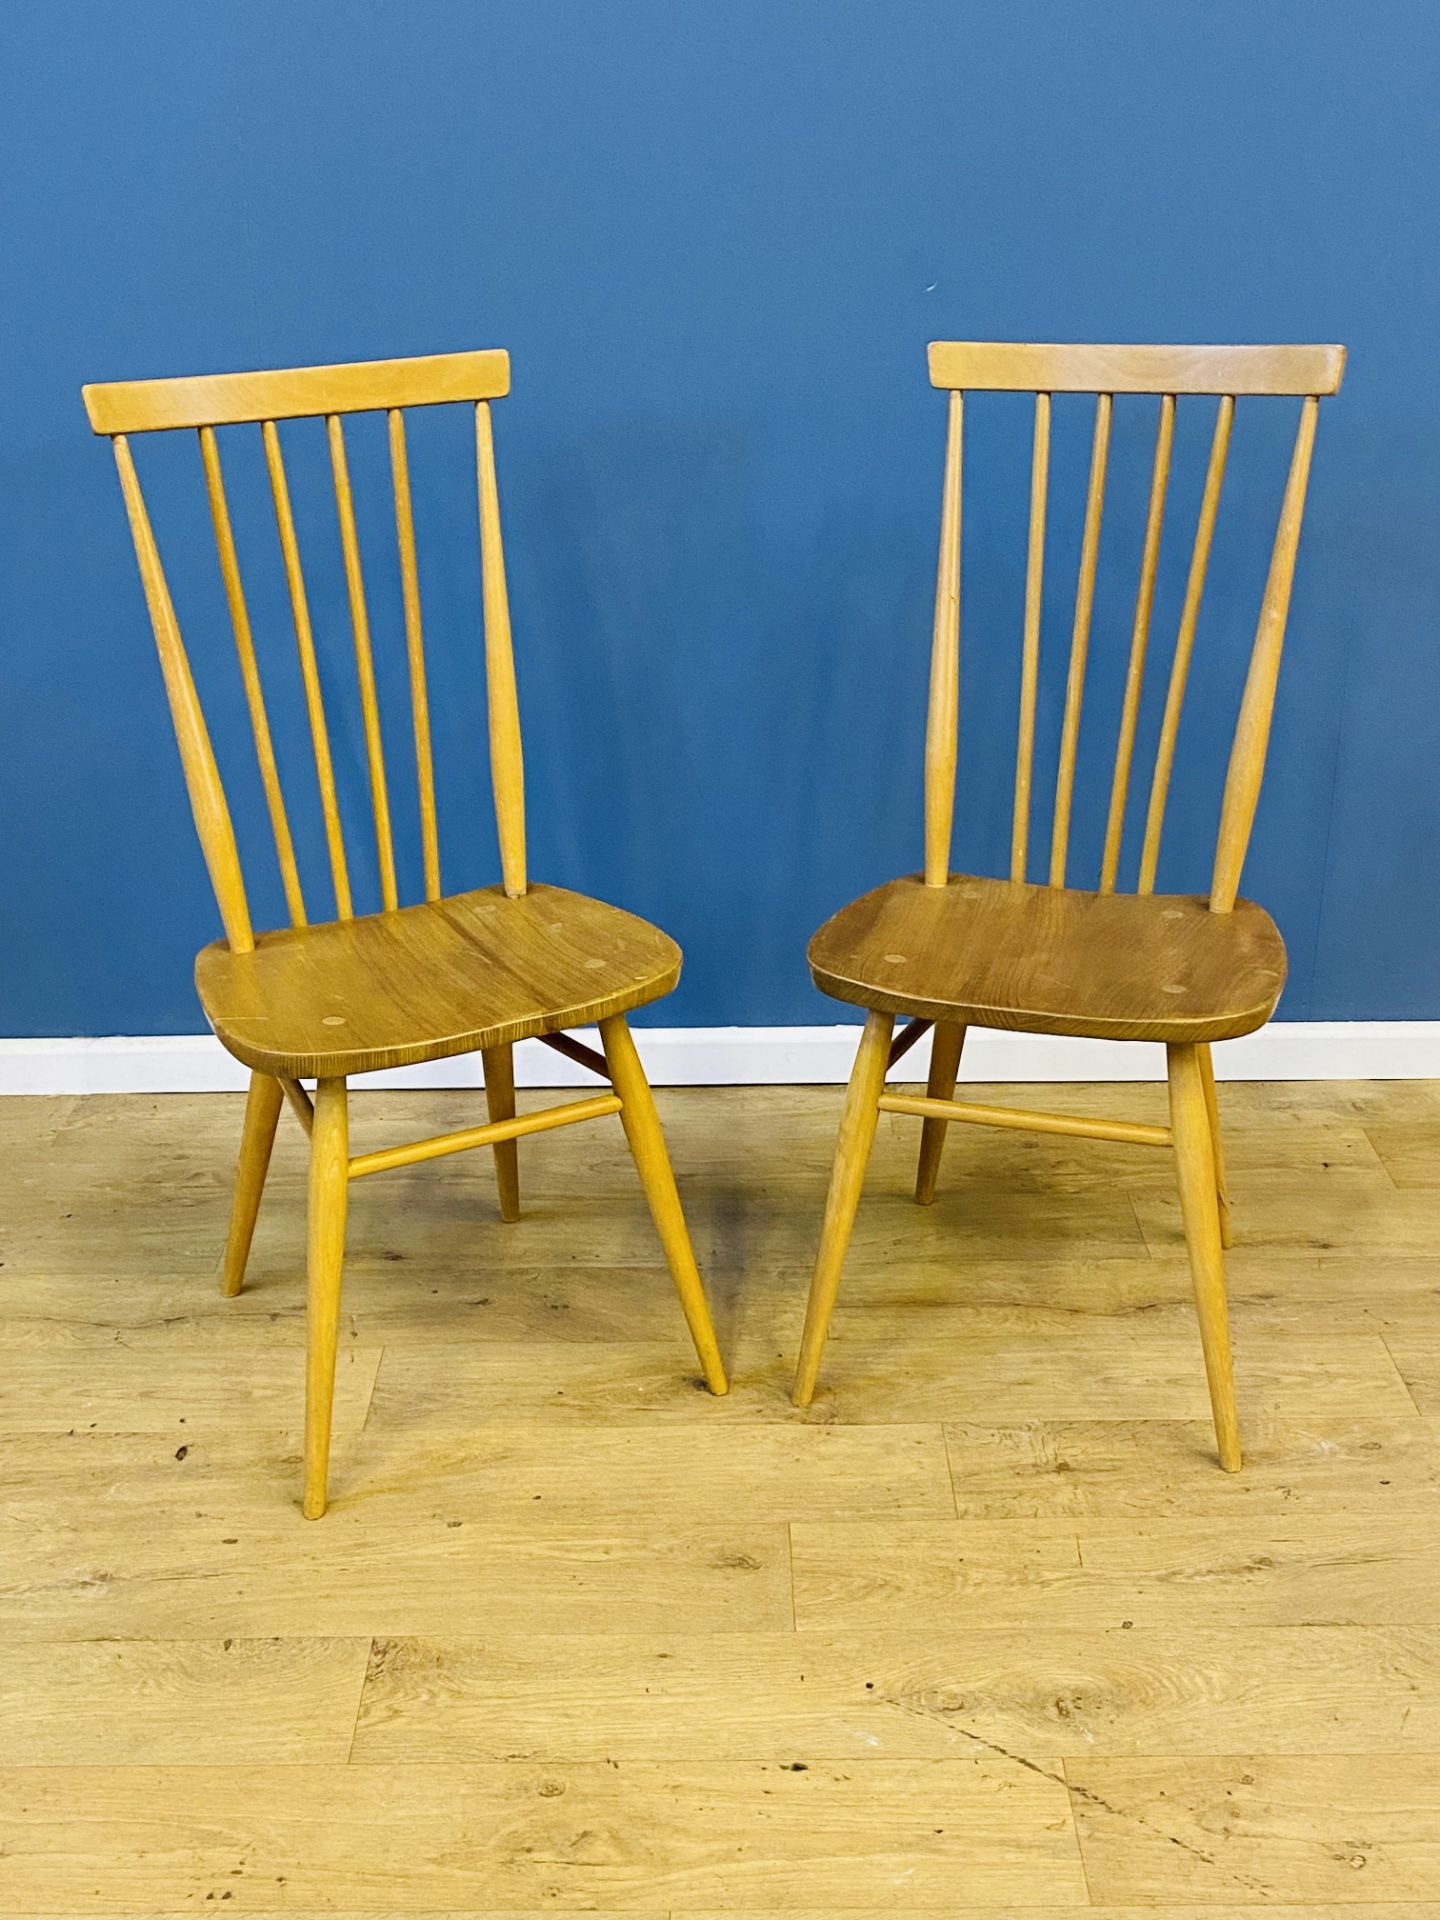 Two Ercol chairs